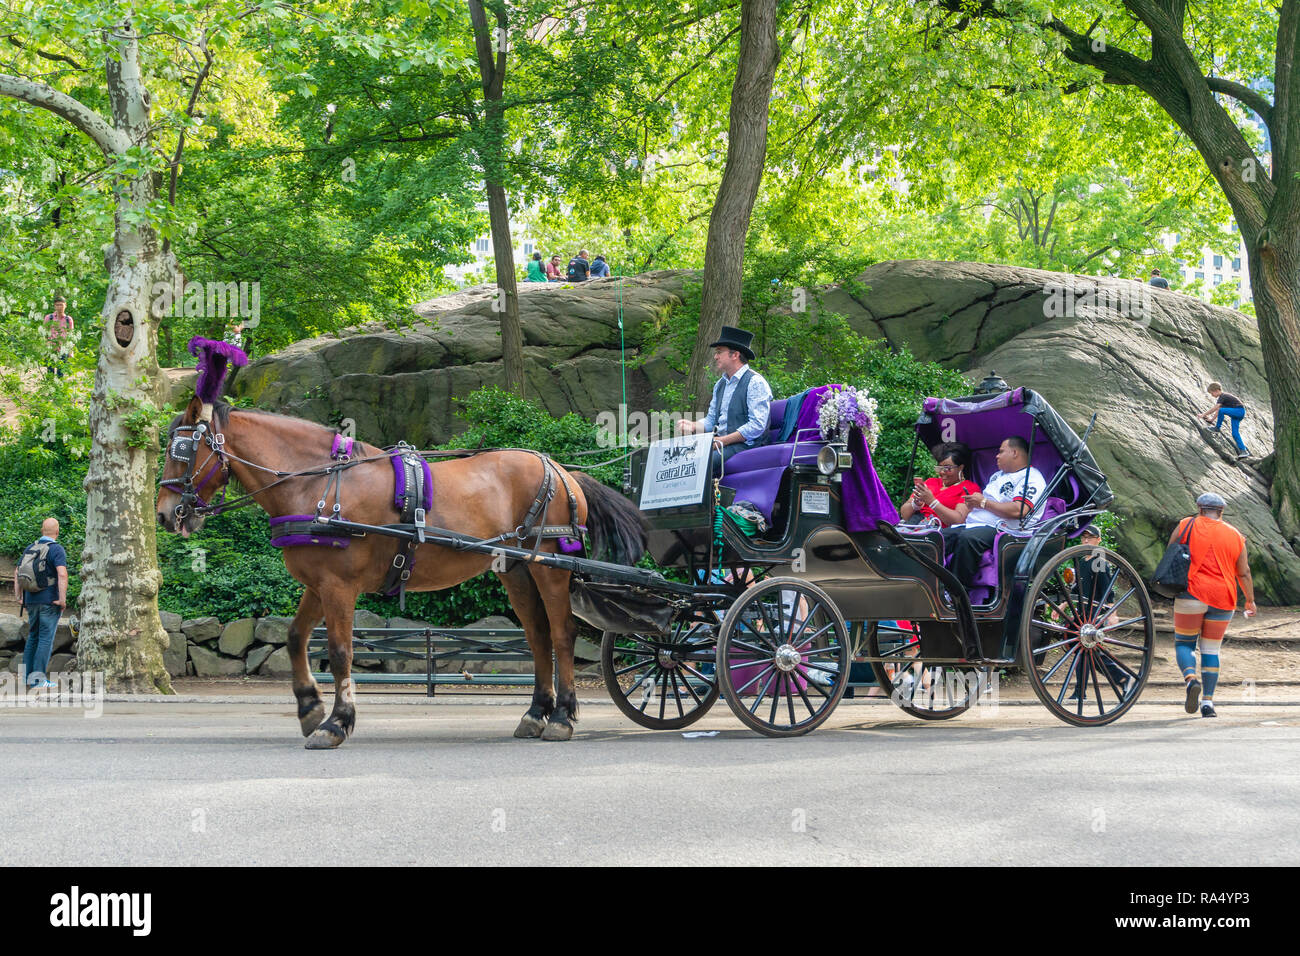 People on horse carriage ride in Central Park of New York City Stock Photo